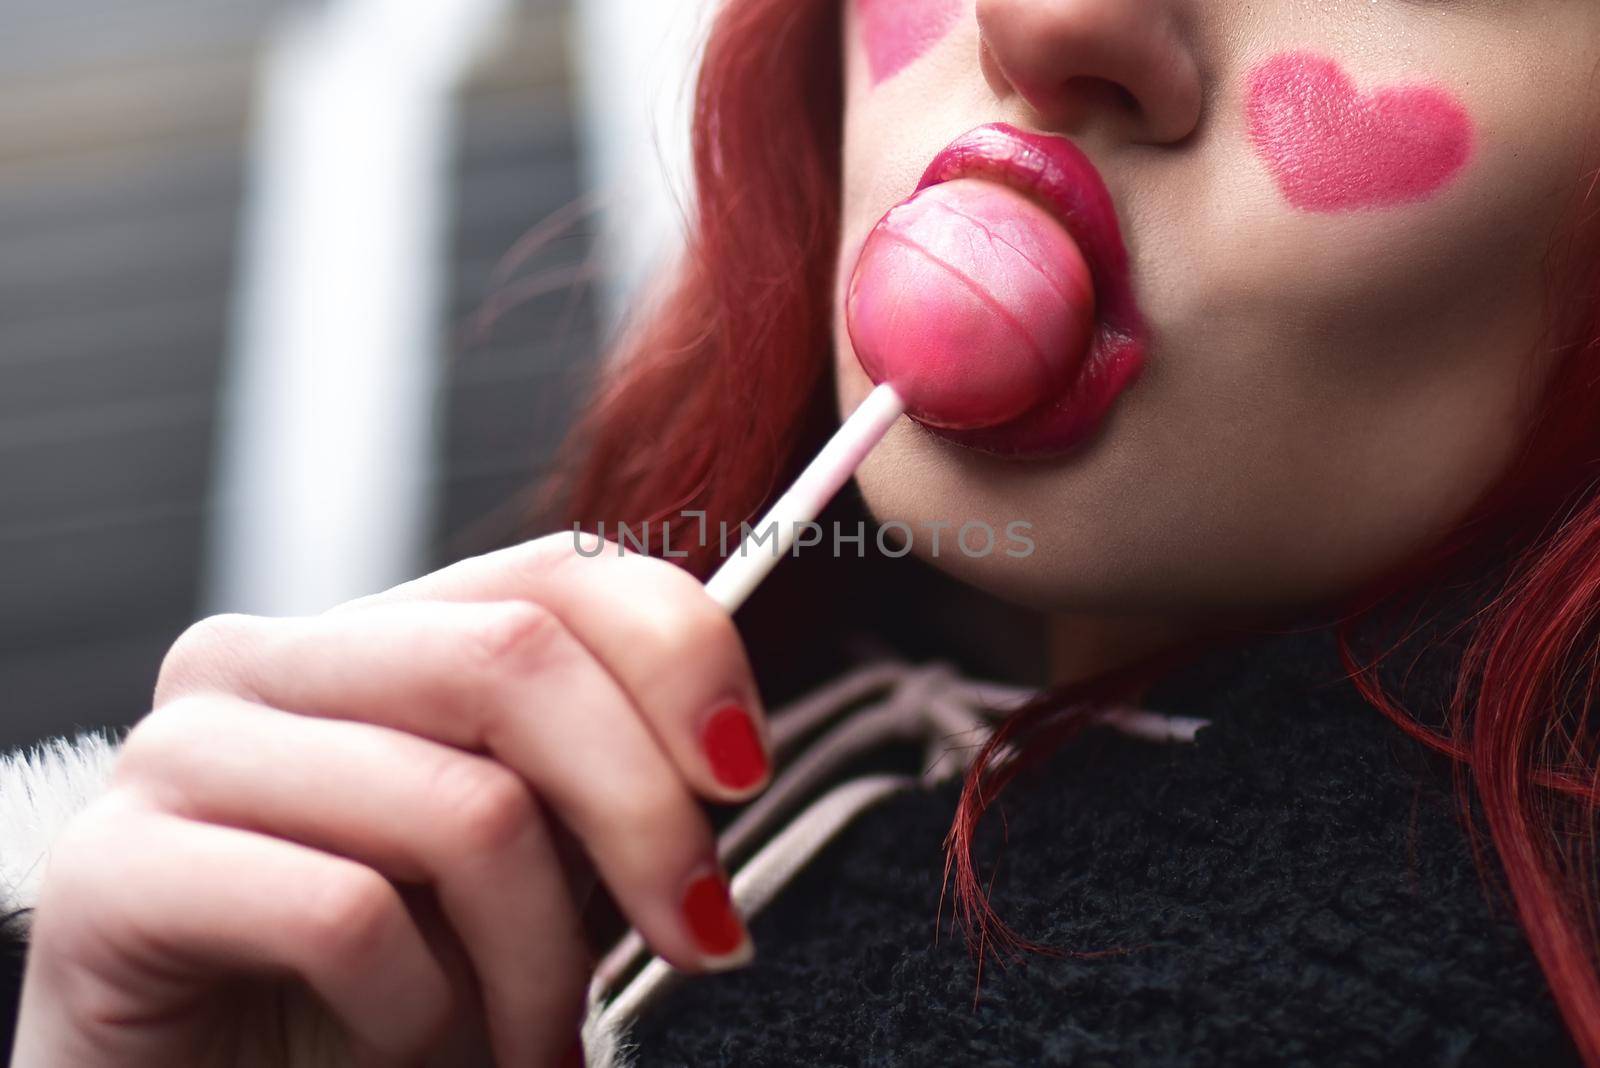 Glamorous close up photo with sexy female lips licking a strawberry lollipop. Beautiful daring bright fashionable makeup. by Nickstock